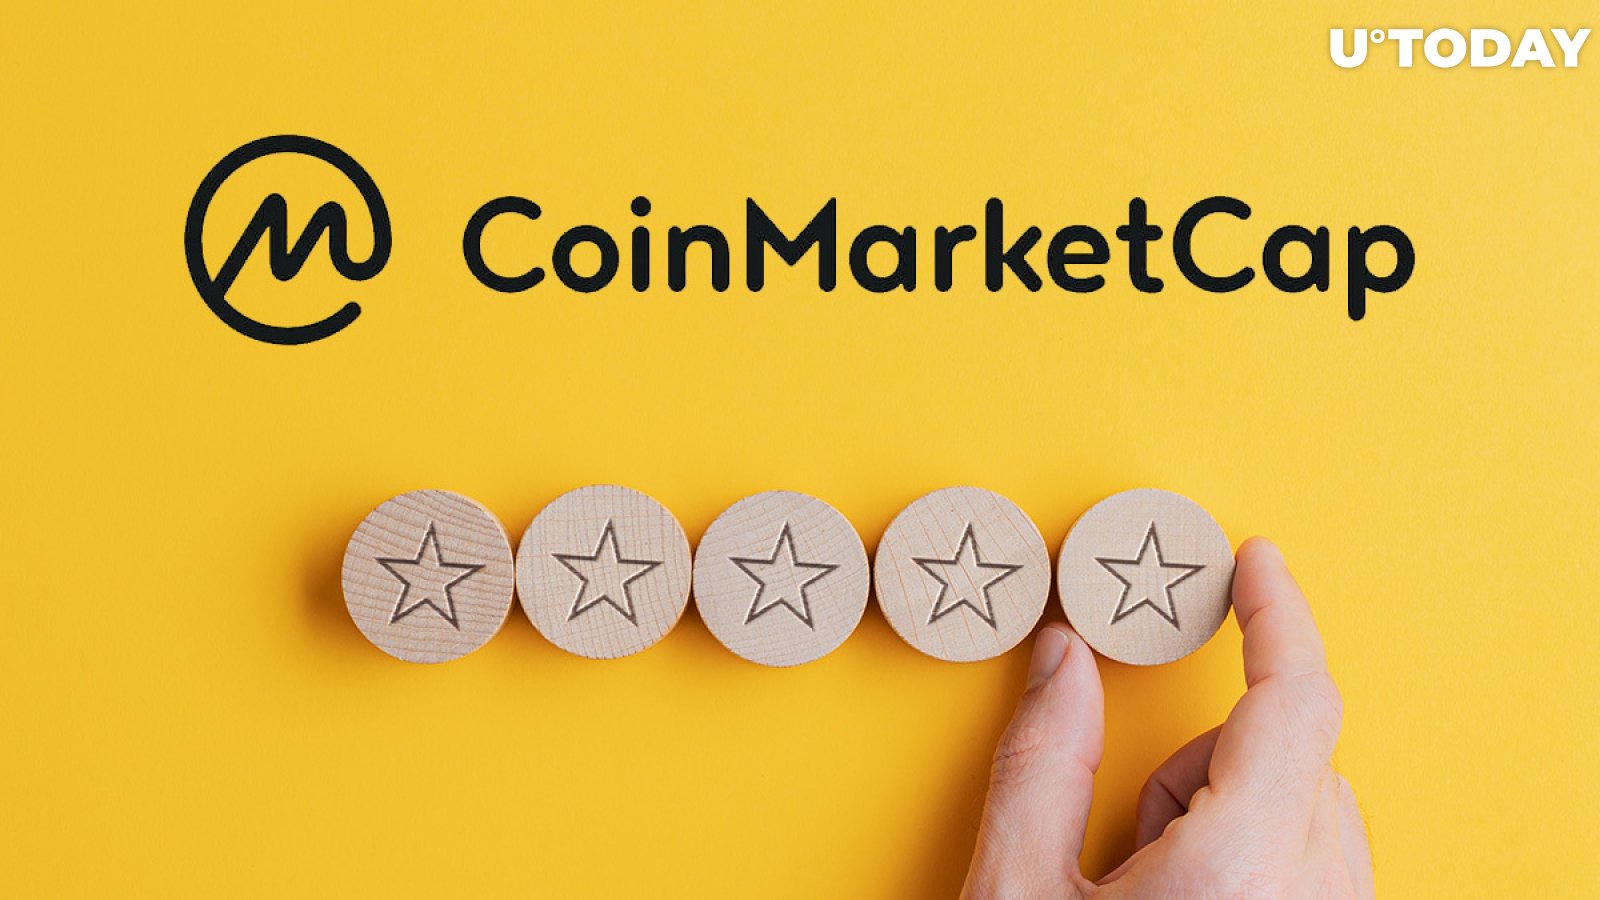 CoinMarketCap Upgrades Ranking System for Cryptocurrency Trading Pairs. Here's What's New